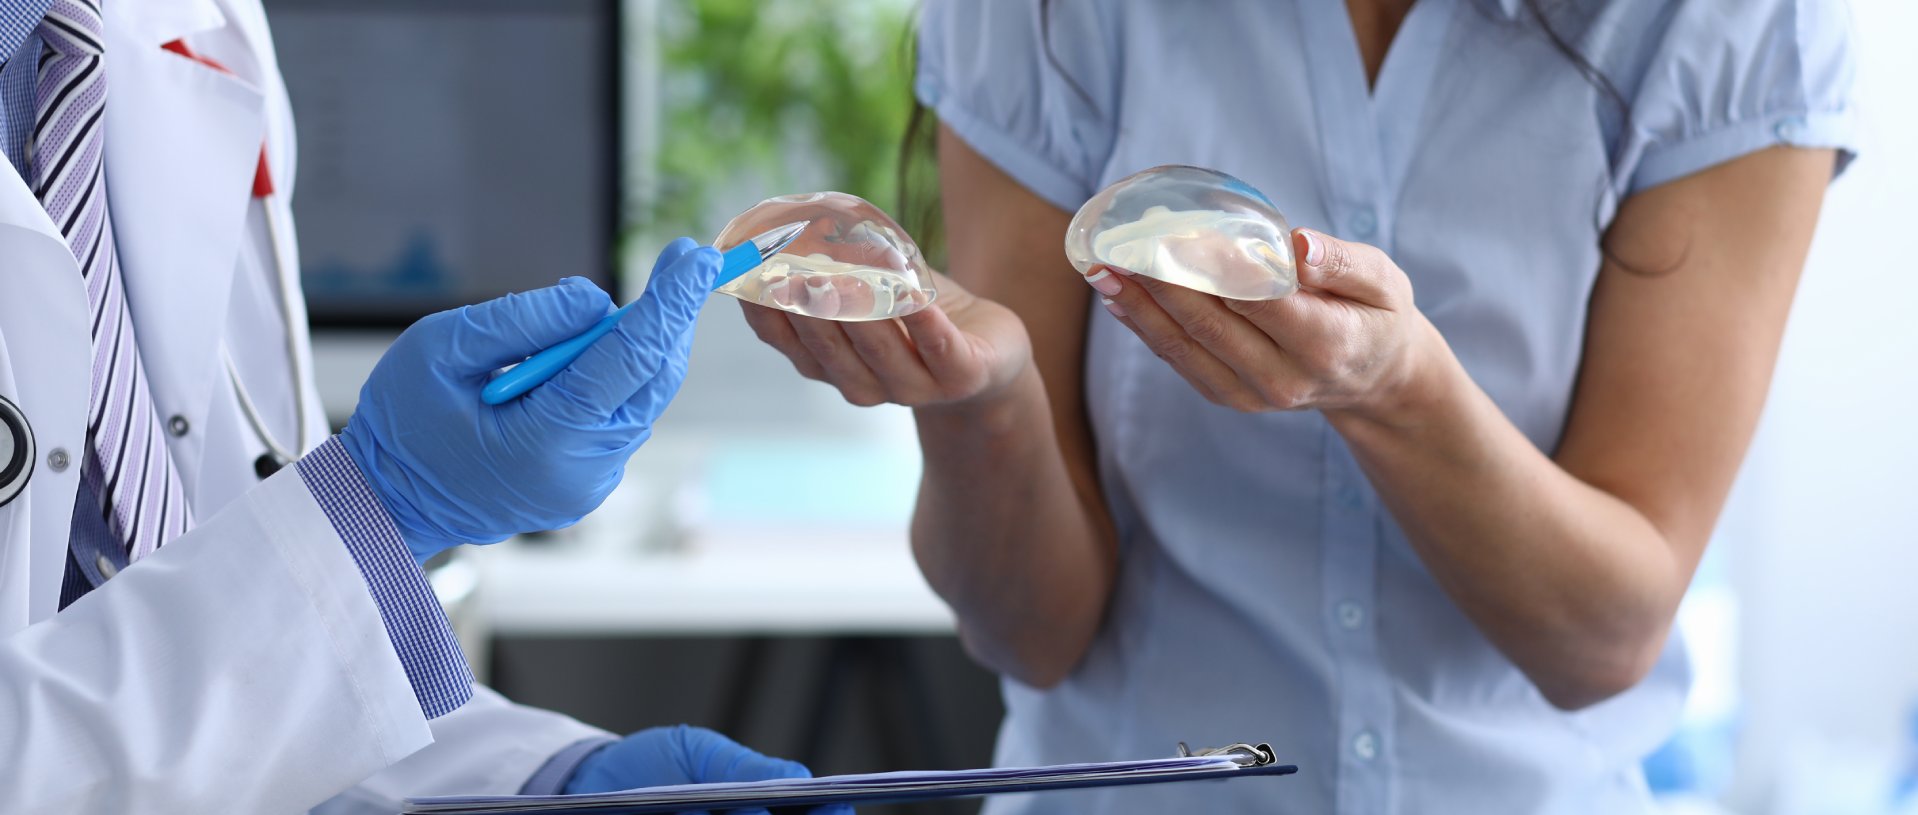 plastic surgeon shows female patient breast implant samples for her future surgery